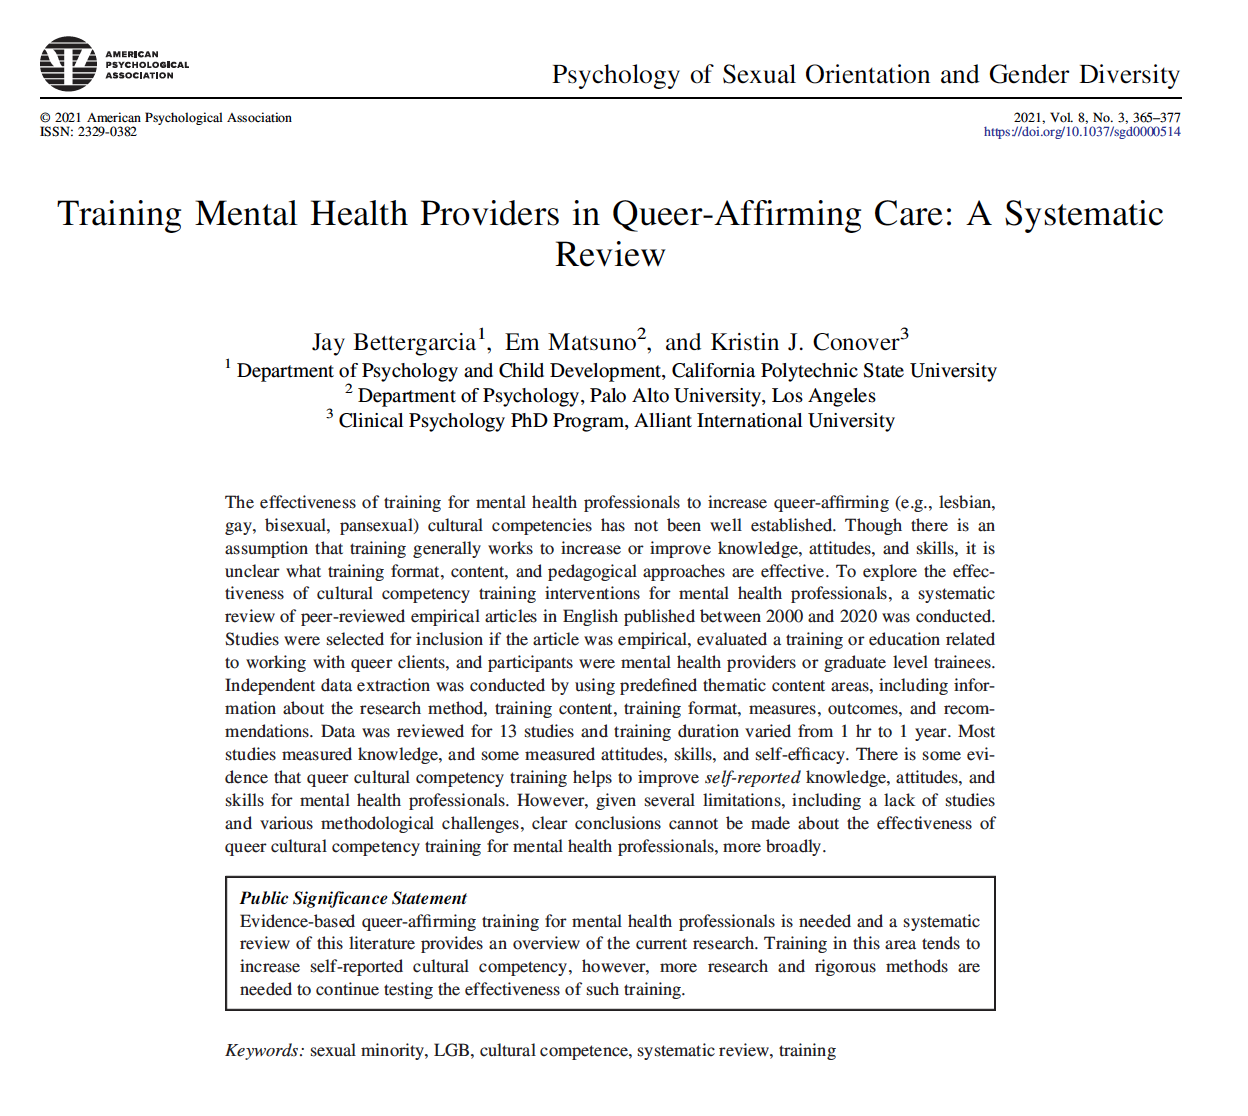 Training Mental Health Providers in Queer-Affirming Care: A Systematic Review